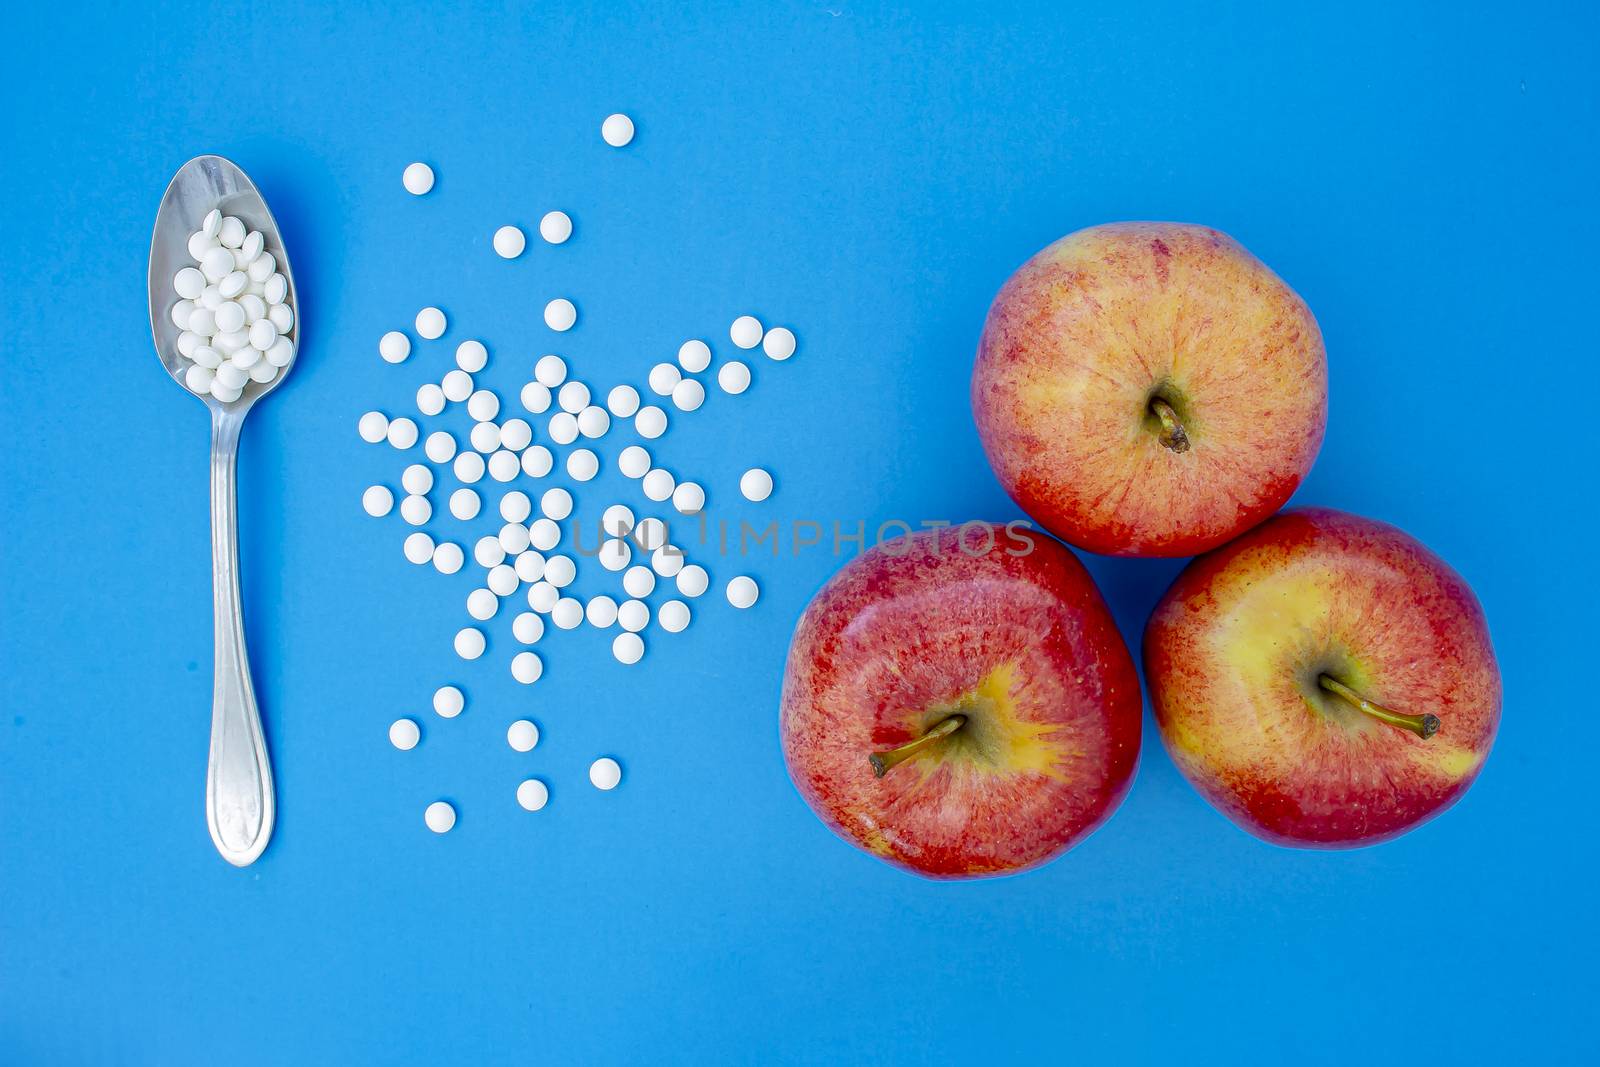 A spoon with supplements vitamins pills next to apples on a blue background by oasisamuel